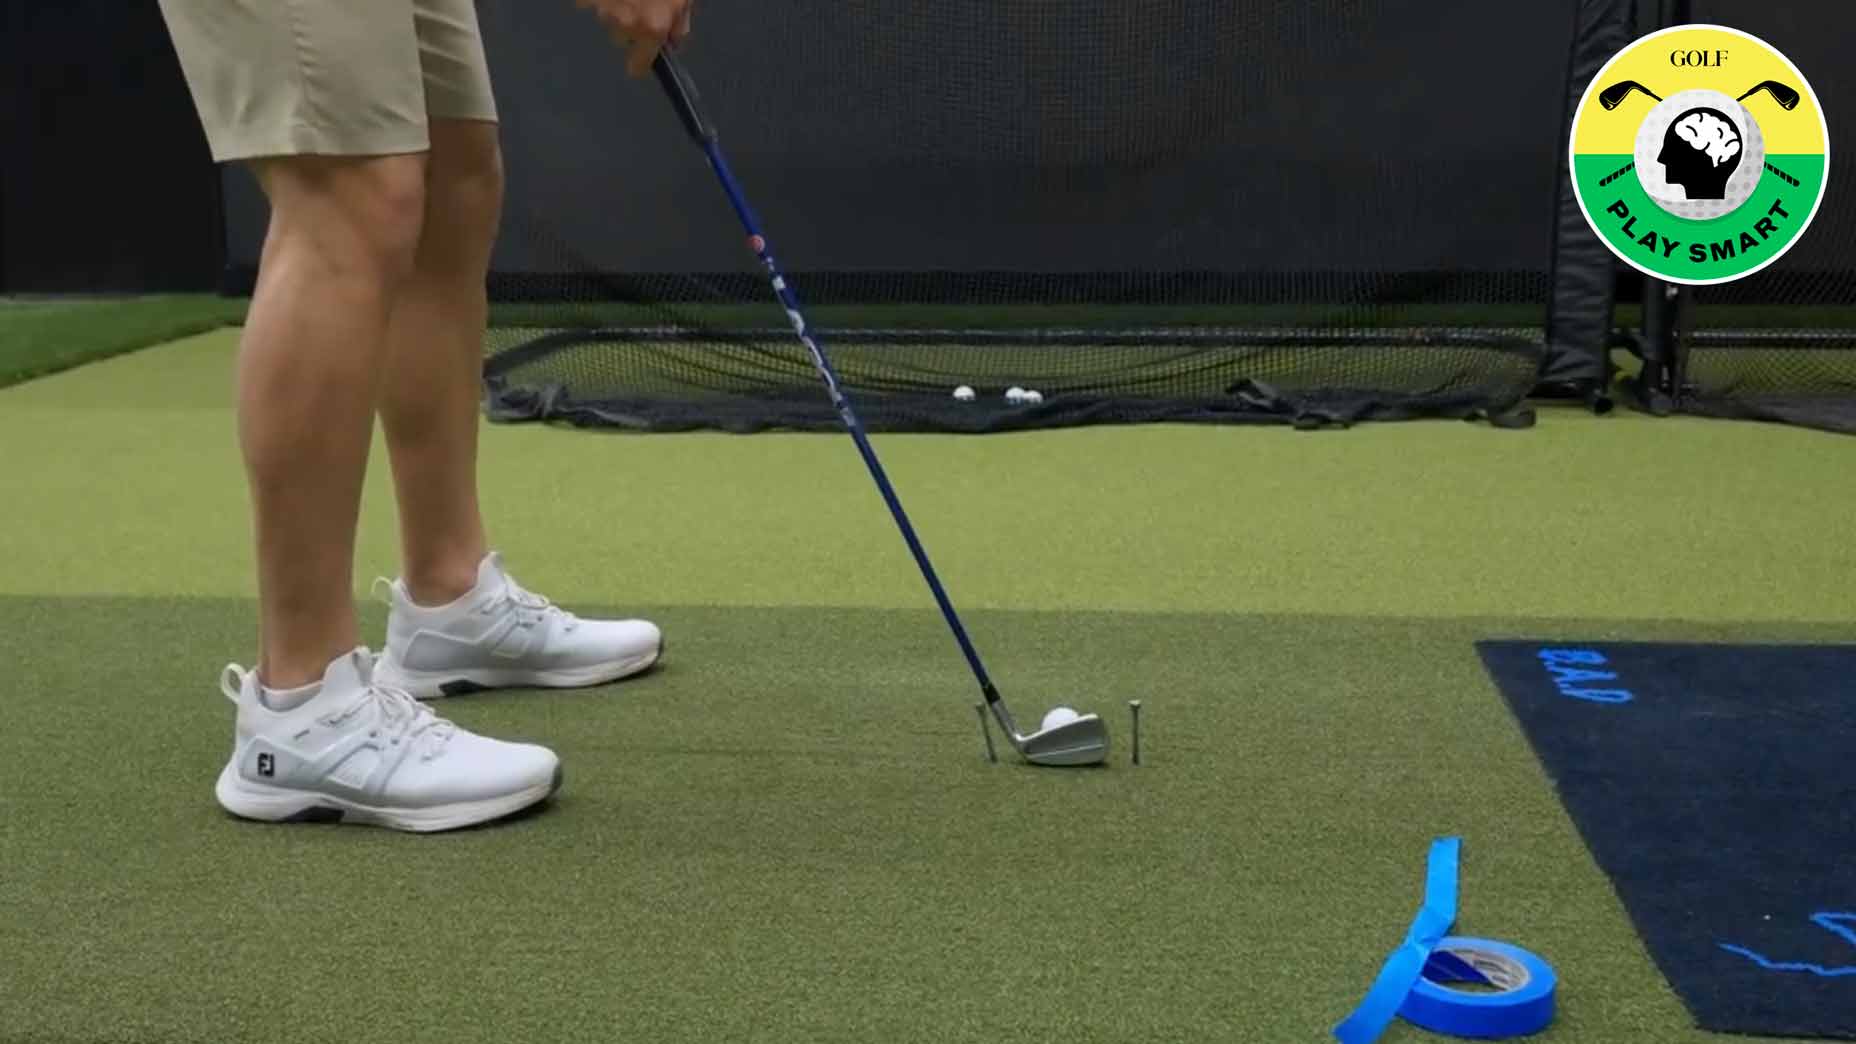 bryson dechambeau sets up two tees on either side of his clubface